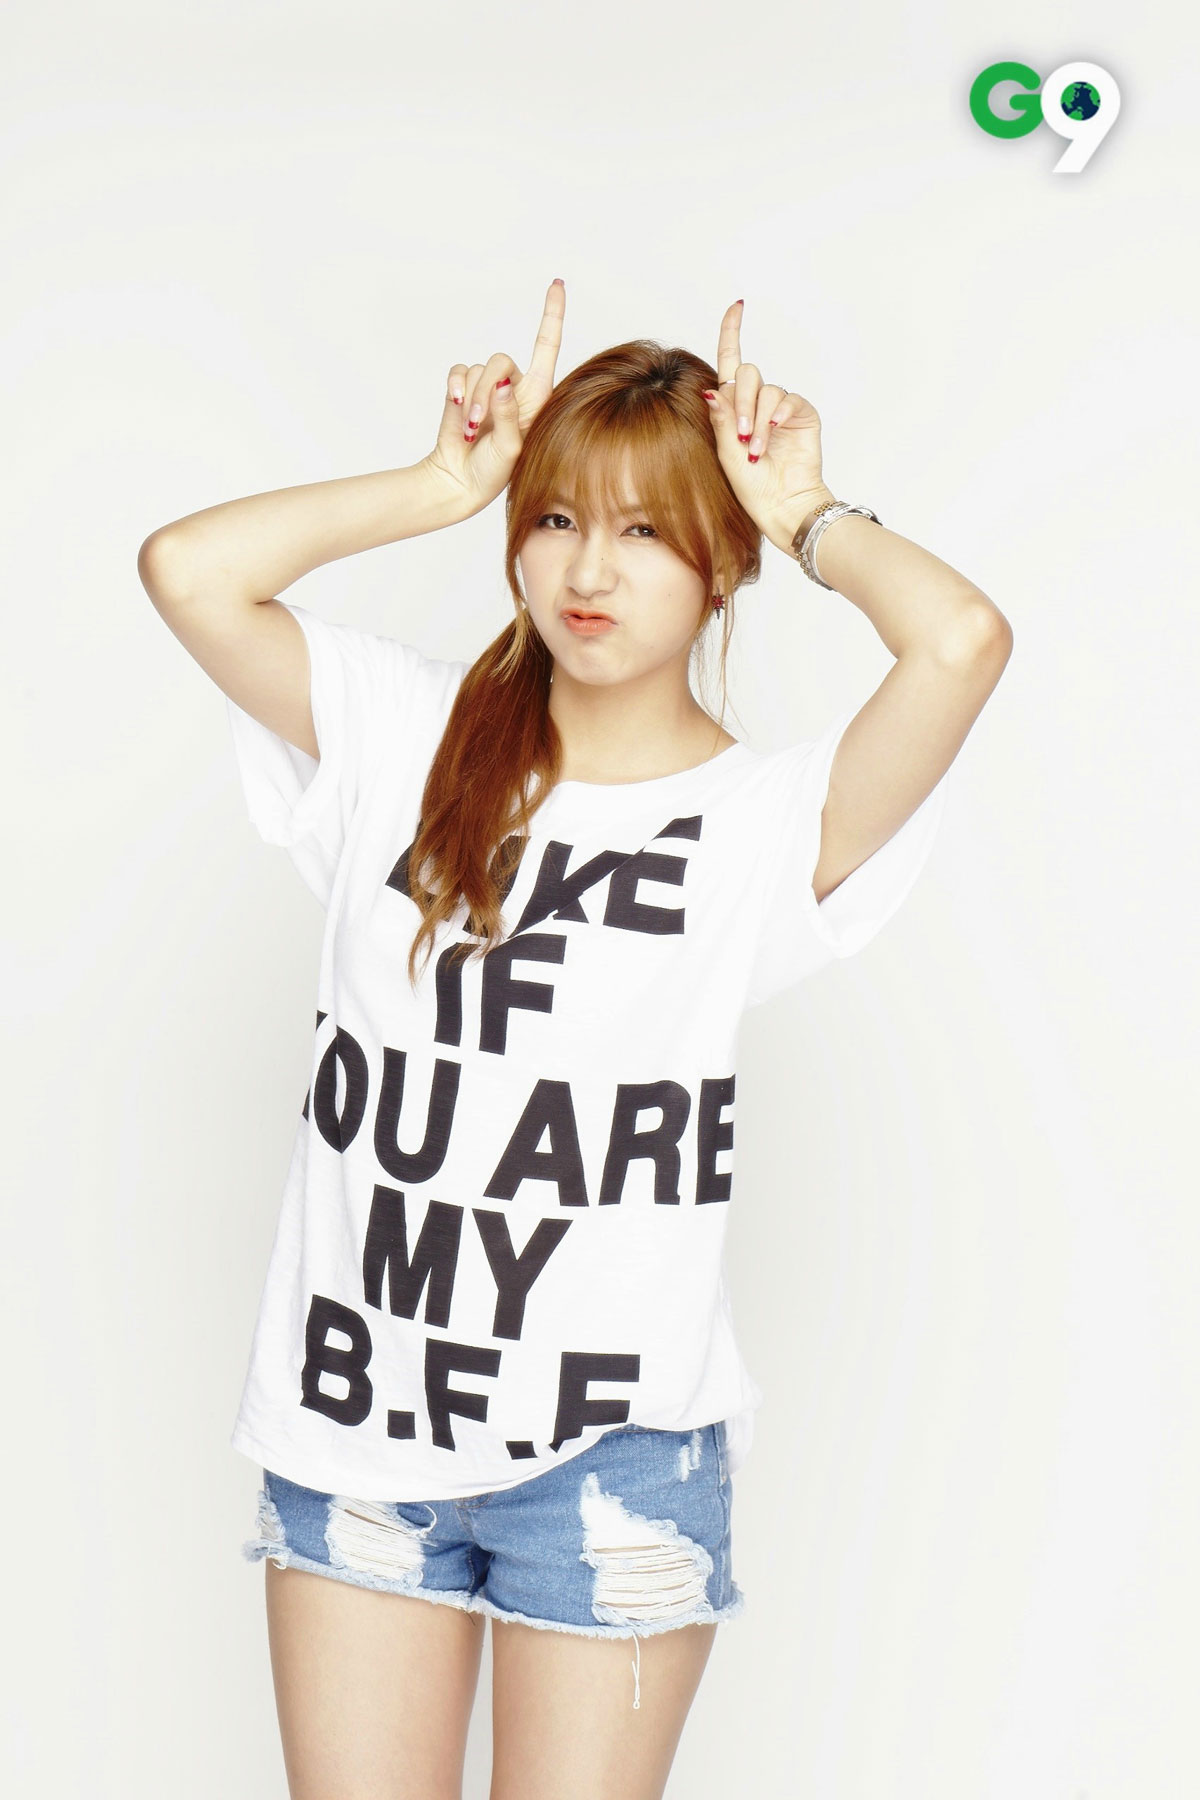 Apink Hayoung G9 advertisement